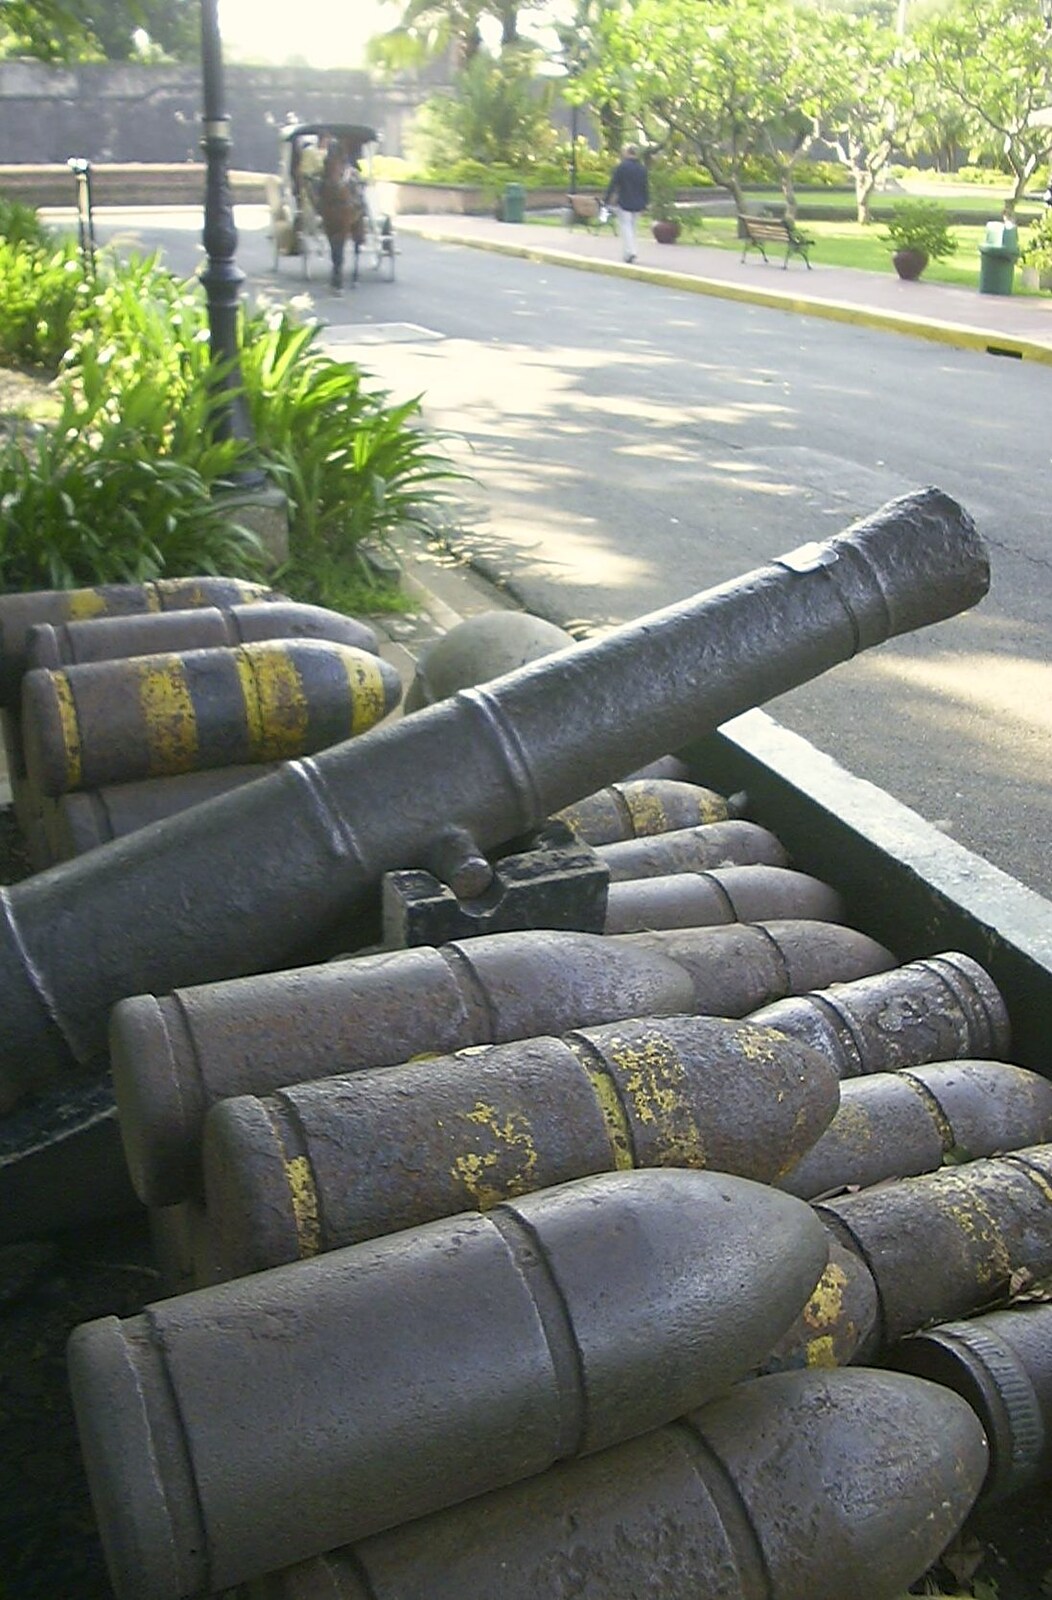 A cannon and some WWII shells from A Postcard From Manila: a Working Trip, Philippines - 9th July 2004